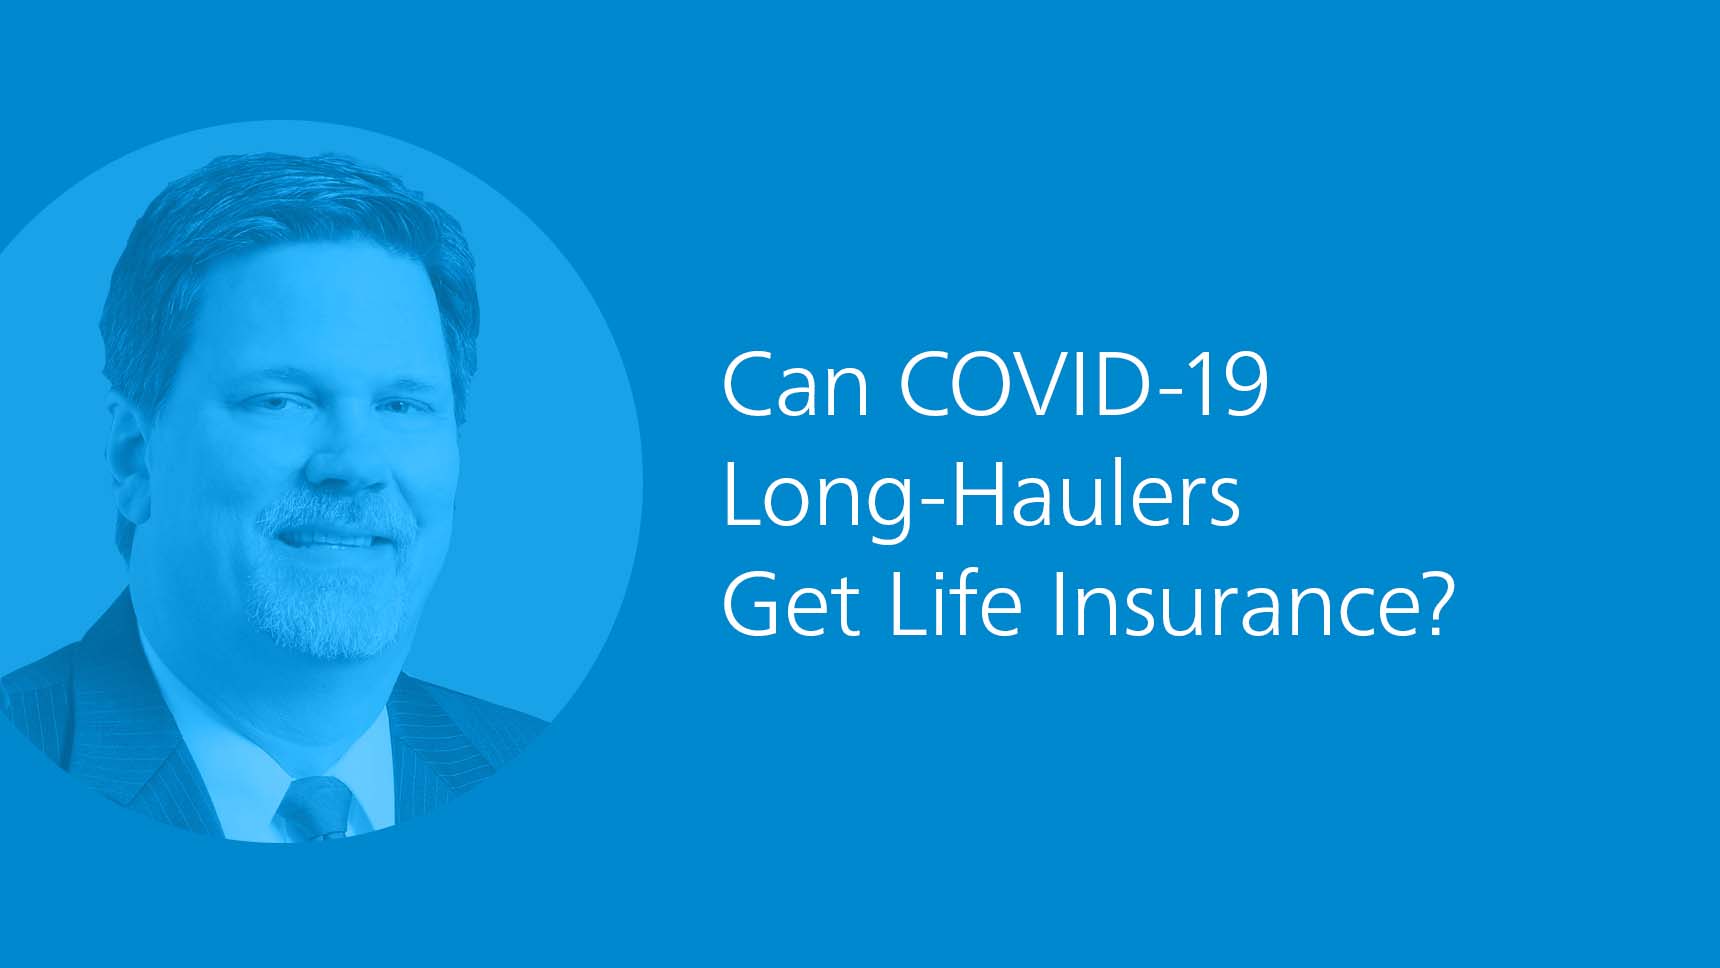 Can COVD-19 Long-Haulers Get Life Insurance?